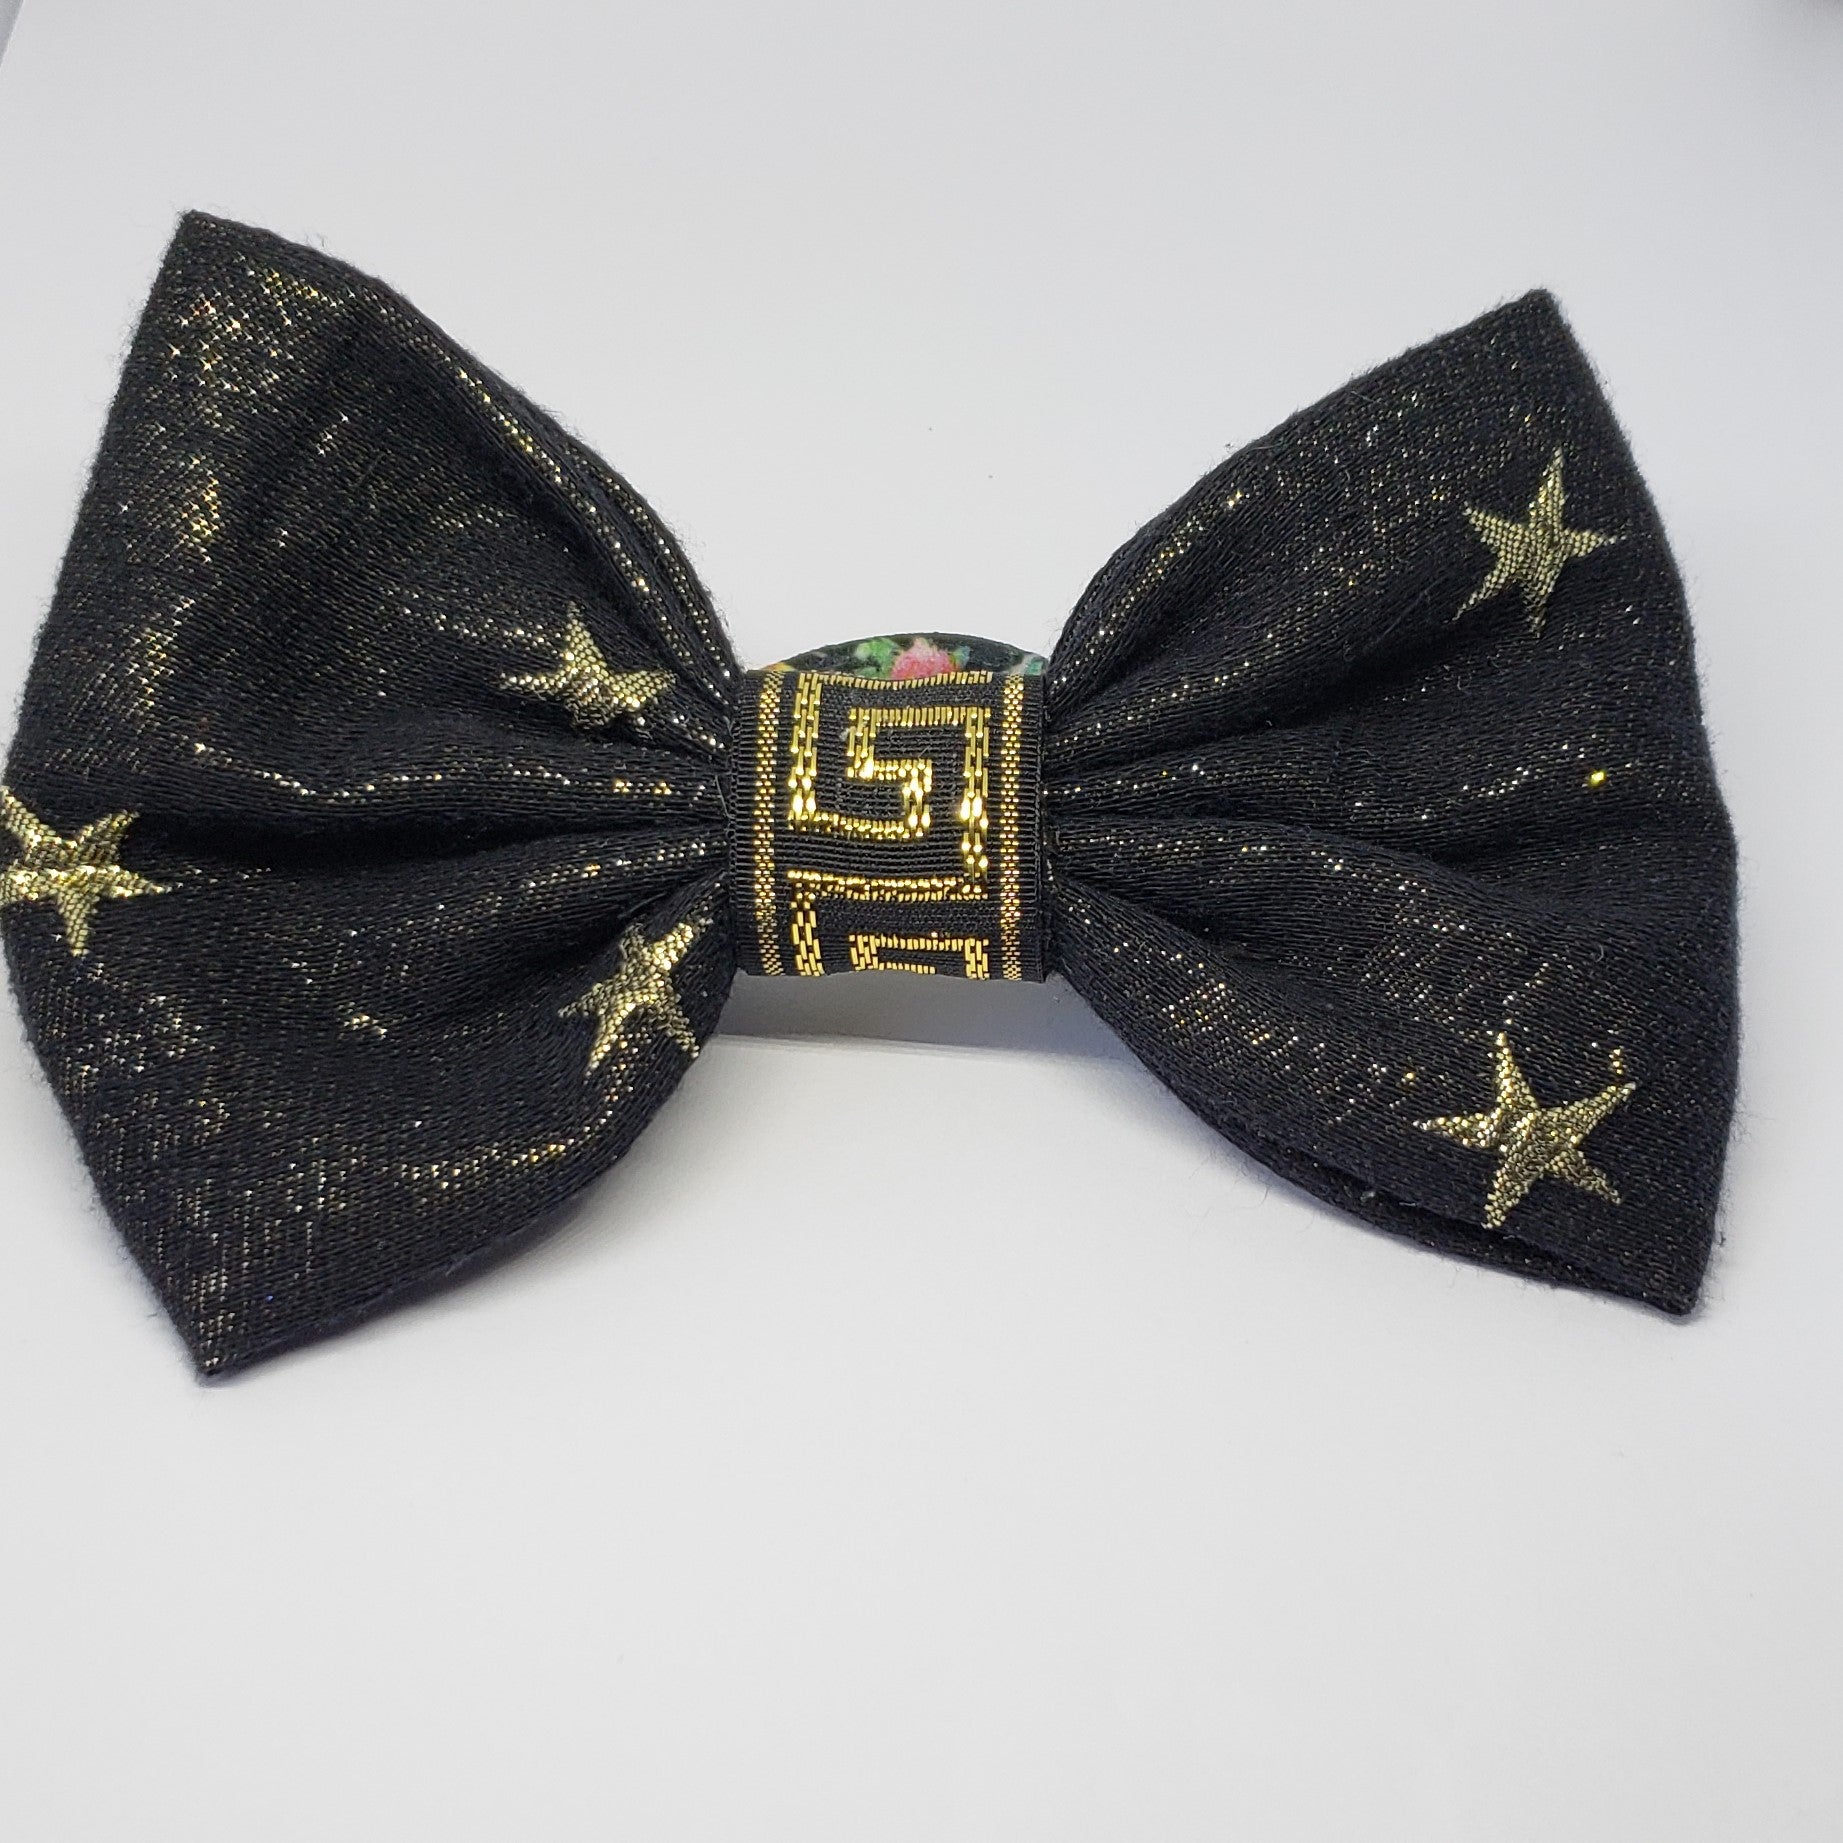 Mia Under the Stars Designer Inspired Black & Gold Multi Floral Bow - Houzz of DVA Boutique